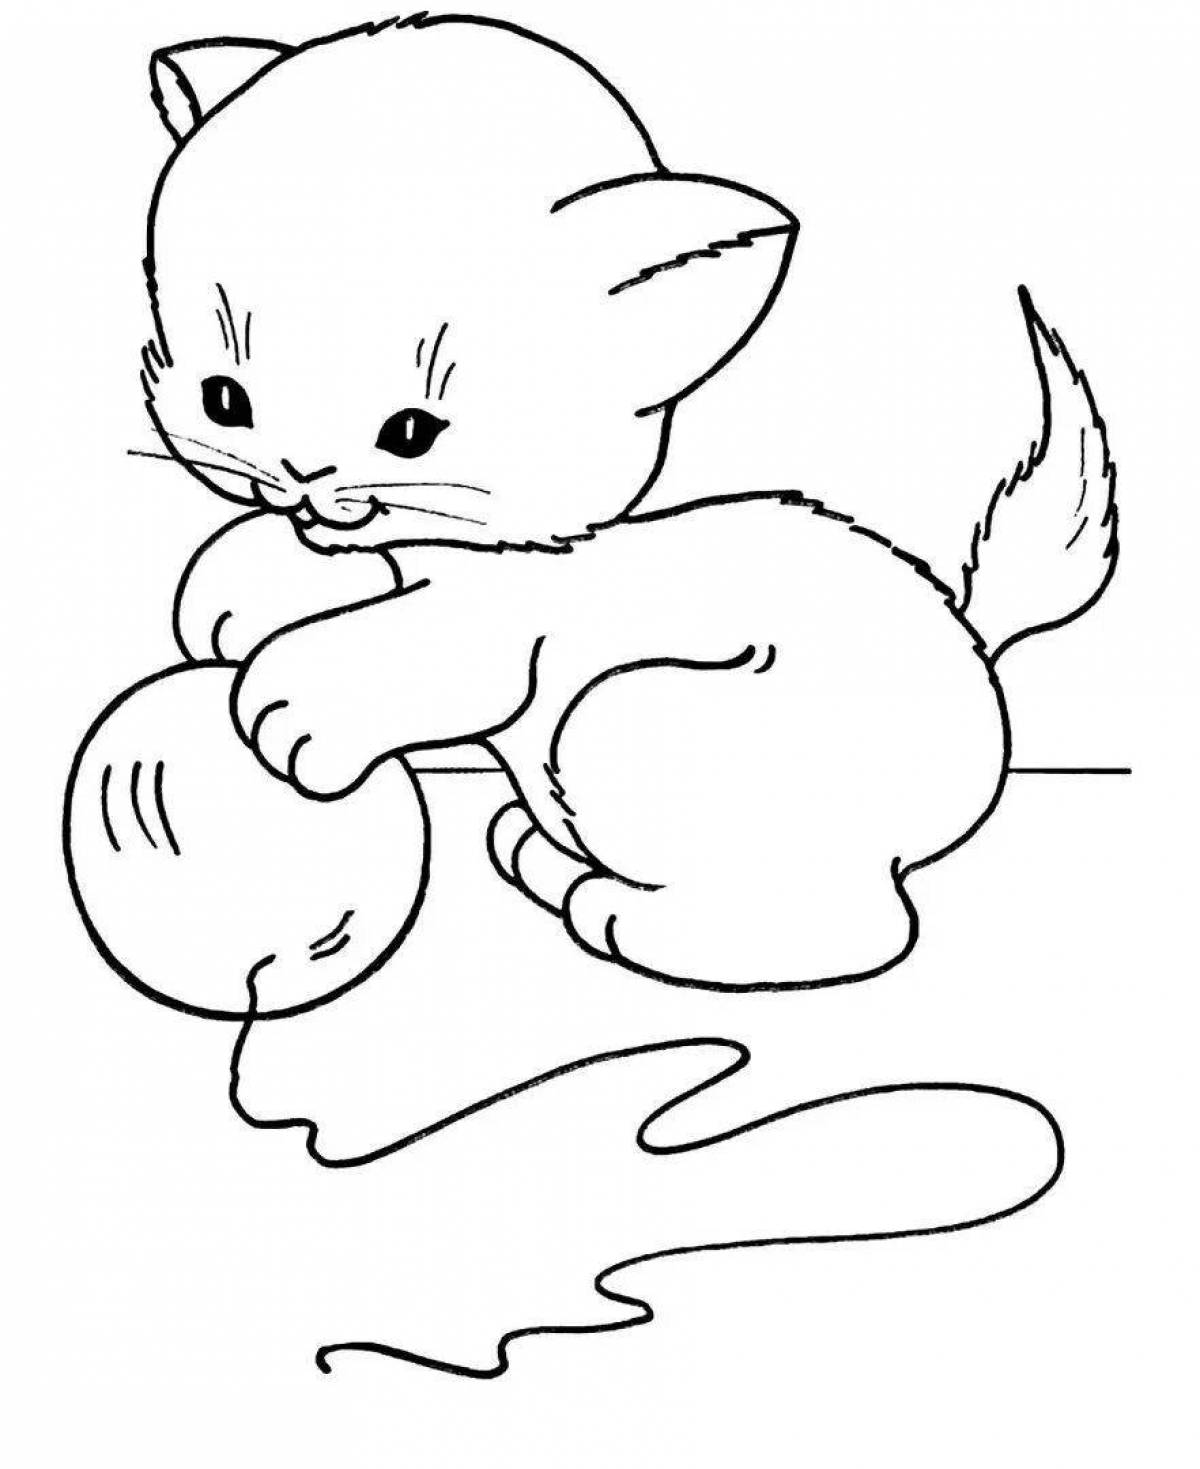 Glitter kitten coloring page